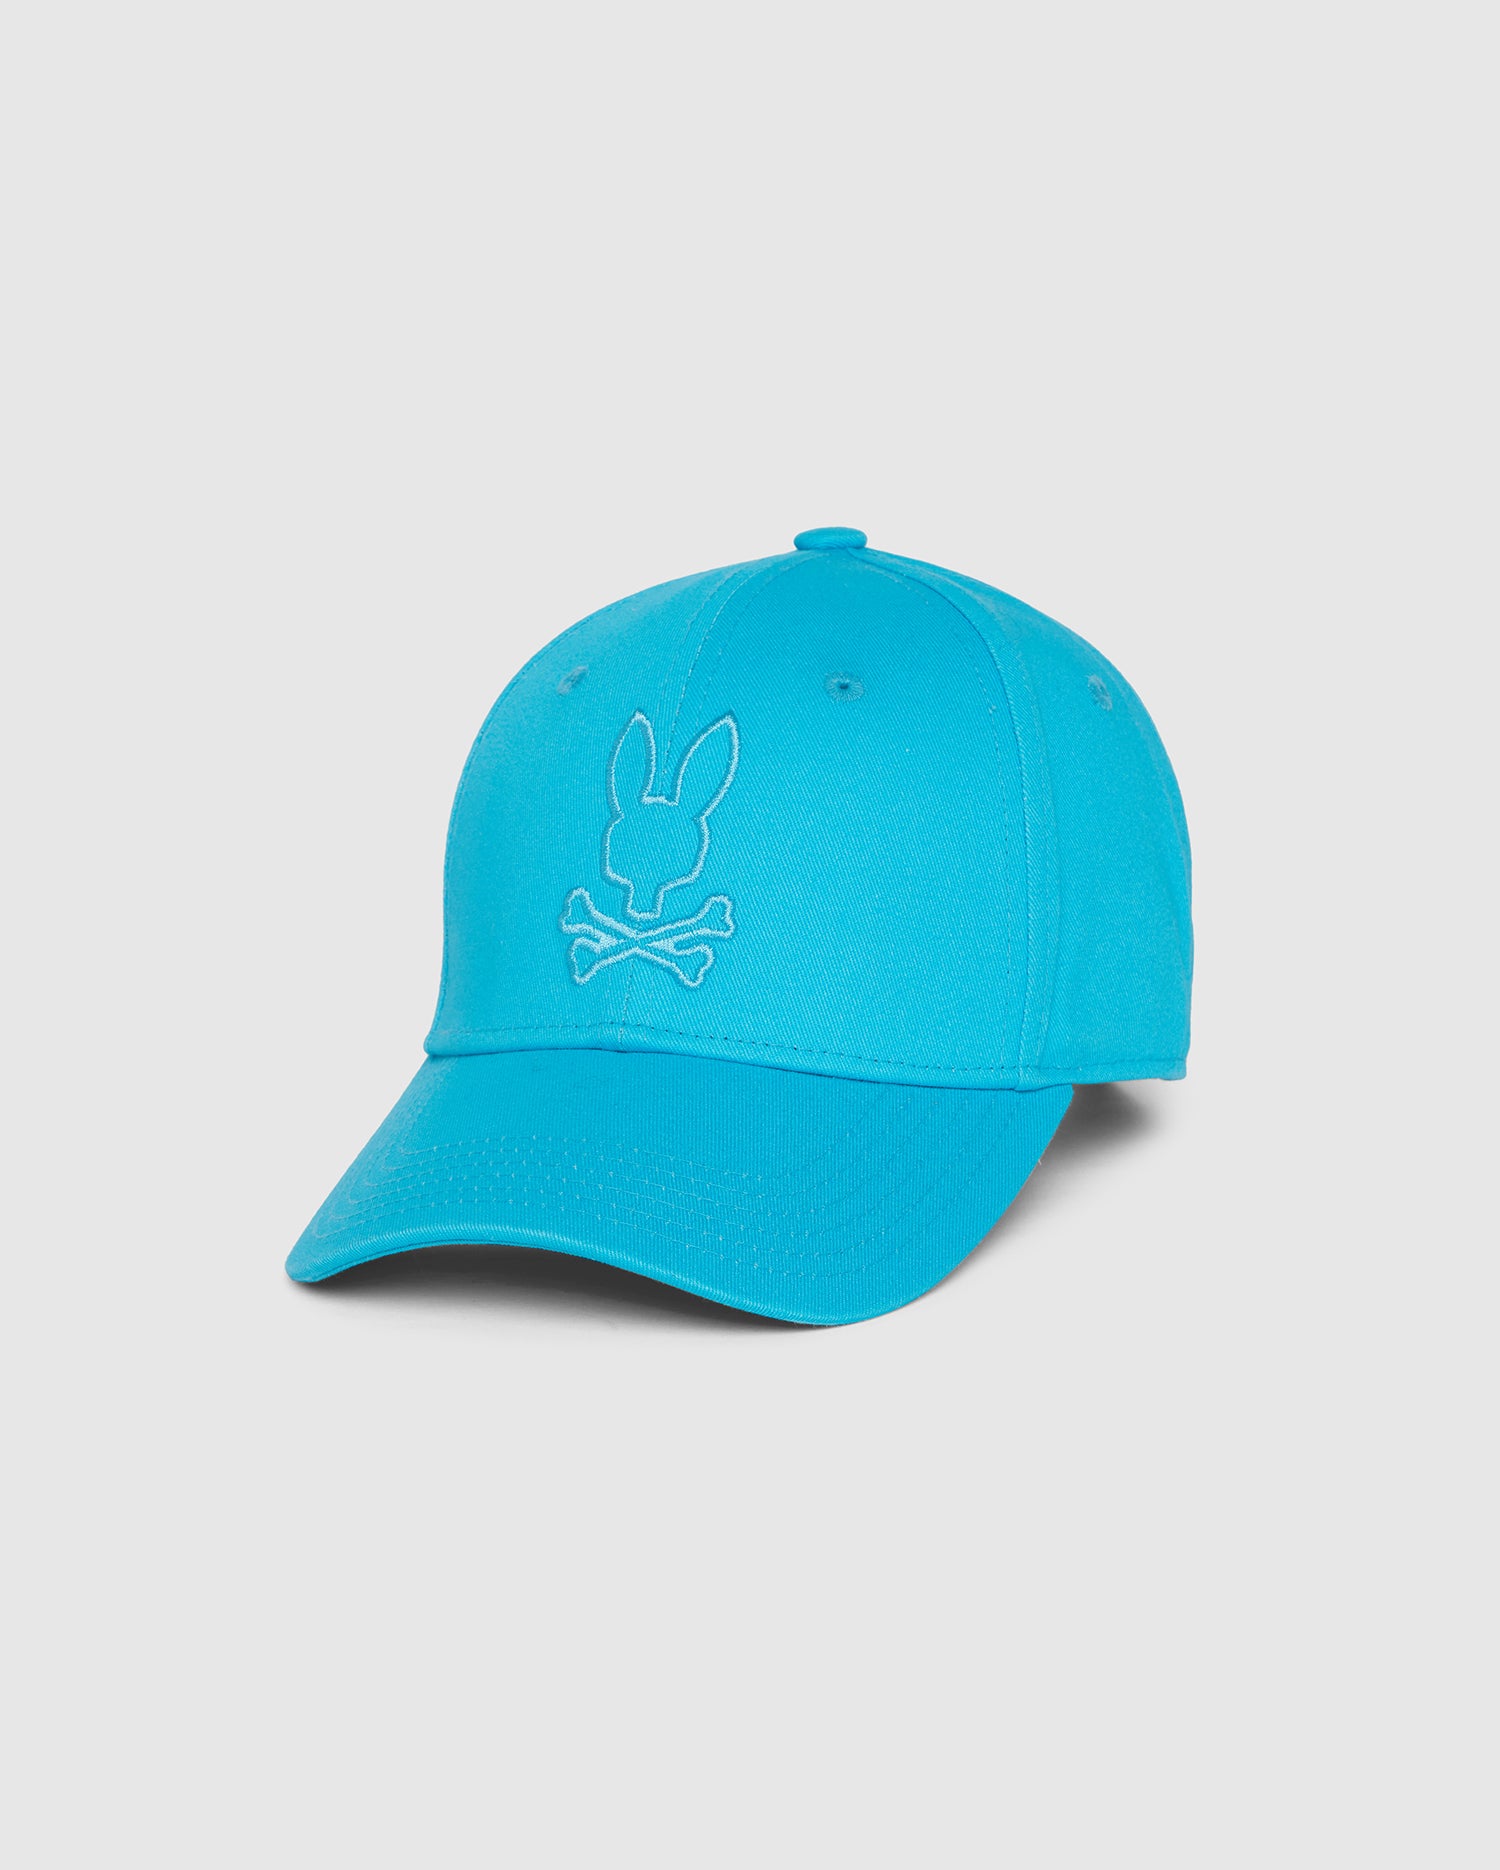 A bright blue Psycho Bunny MENS DANBY BASEBALL CAP - B6A360B2HT with a curved brim and an embroidered design on the front. The design features a Bunny head above a pair of crossed bones. The cap has a button on top and is displayed against a plain white background.